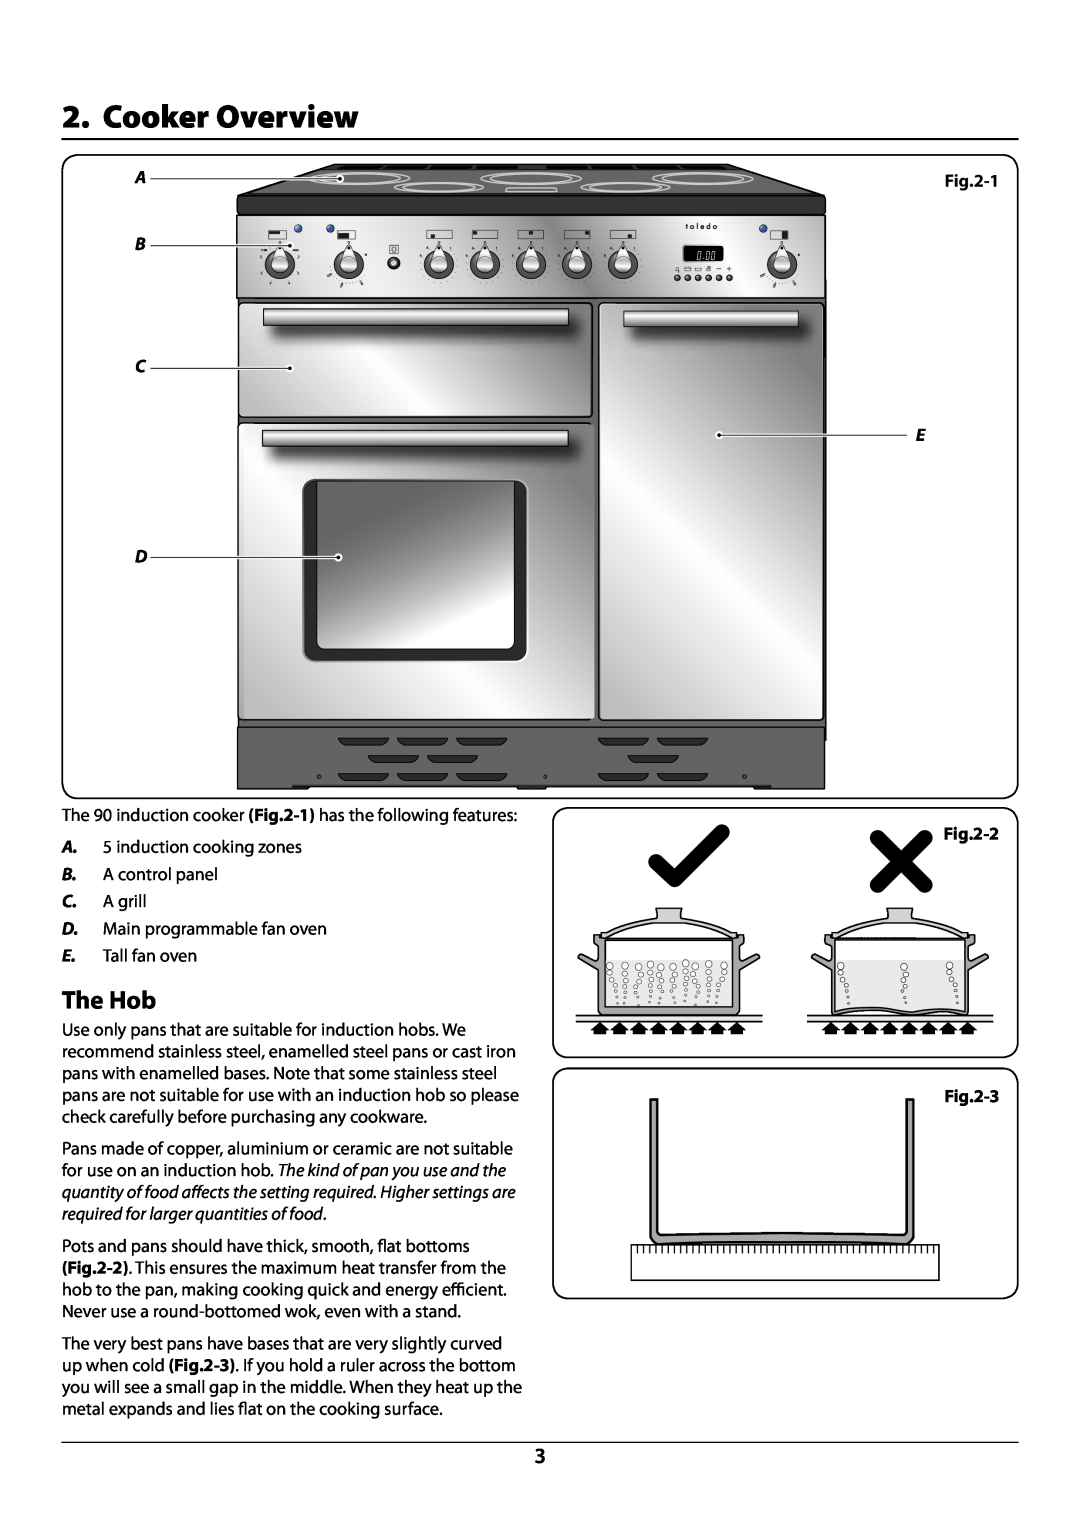 Rangemaster U109952 - 02 manual Cooker Overview, The Hob, DocNo.025-0011 - Overview - 90 induction - toledo 